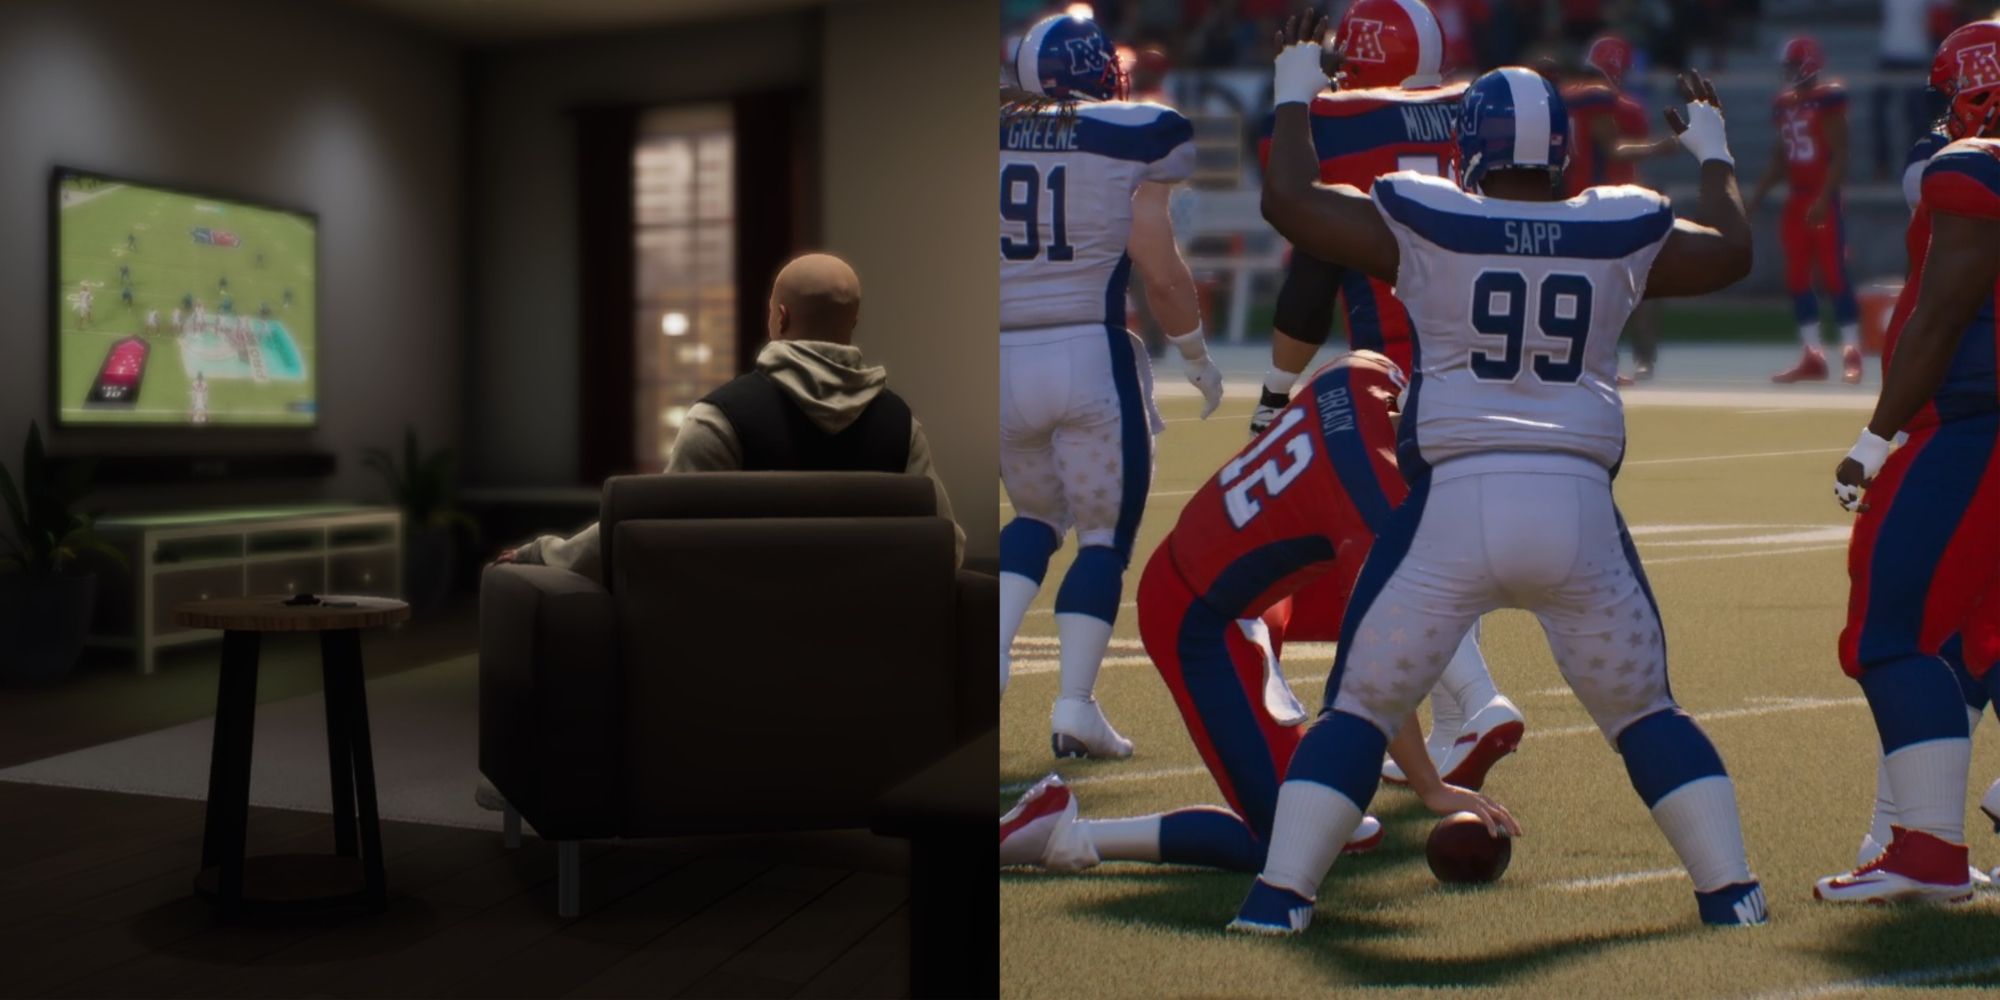 Madden 23 tips with 7 tricks to know before you play